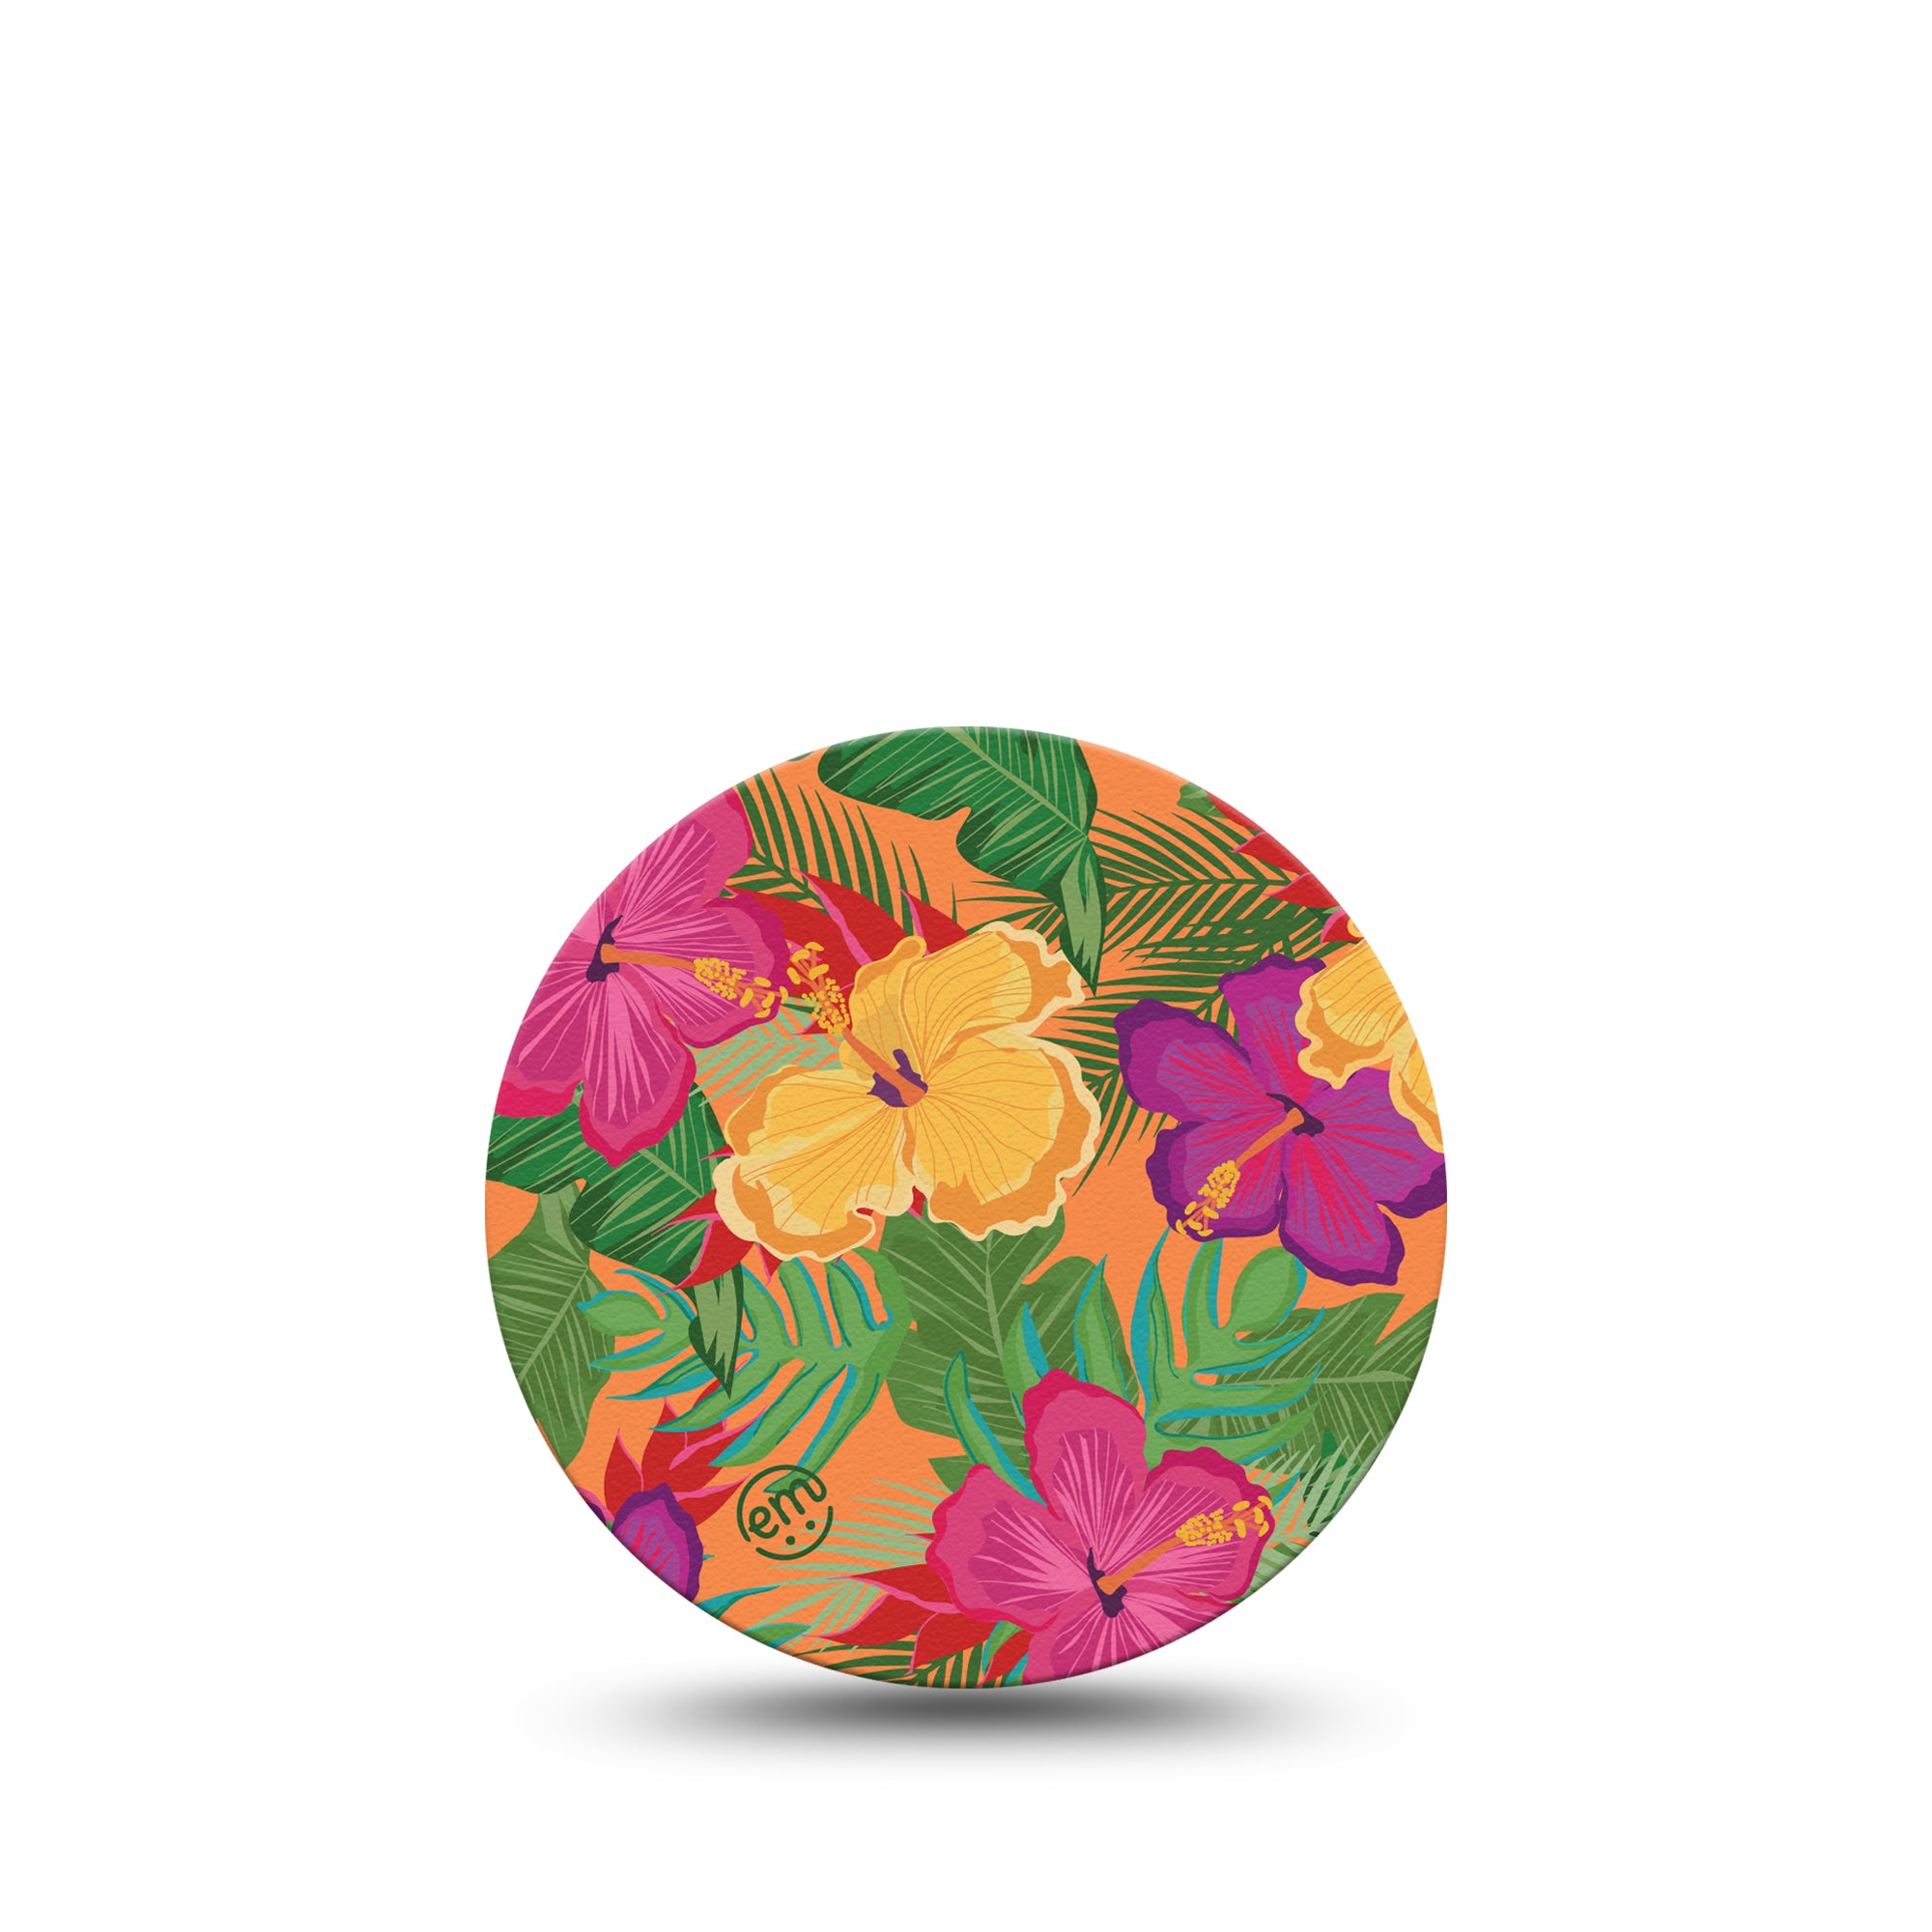 Bright Hibiscus Libre 3 Overpatch, Single, Tropical Flowers Inspired, CGM Fixing Ring Tape Design